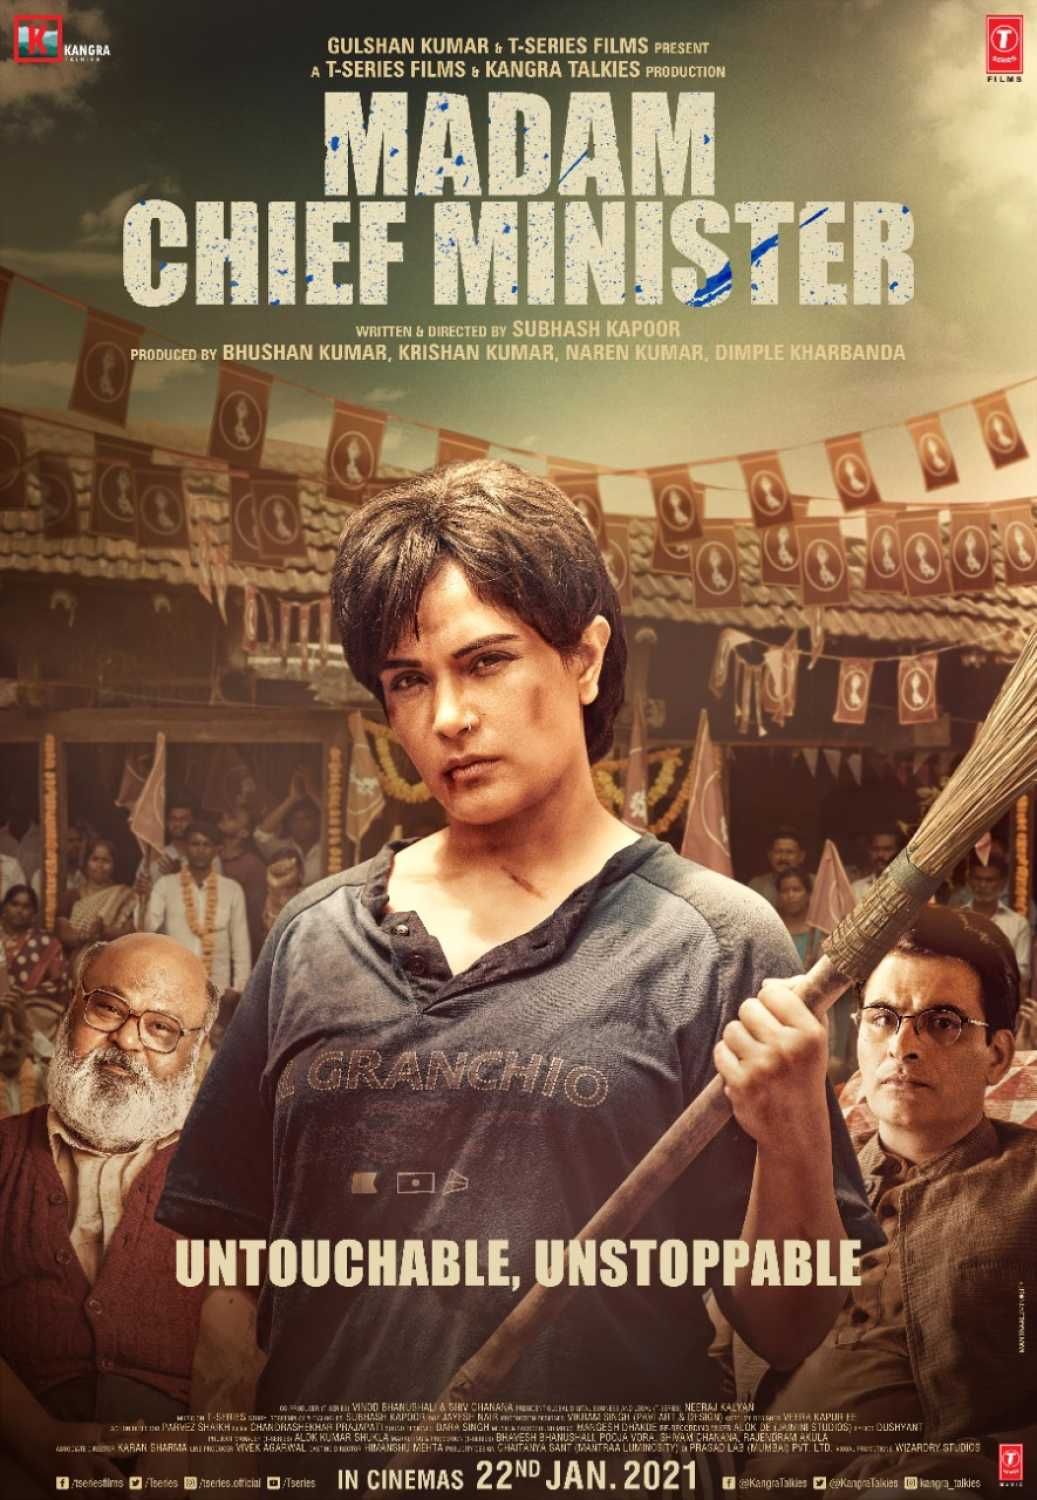 Richa Chadha On Madam Chief Minister's Poster Controversy: " I'm Listening, Learning..."